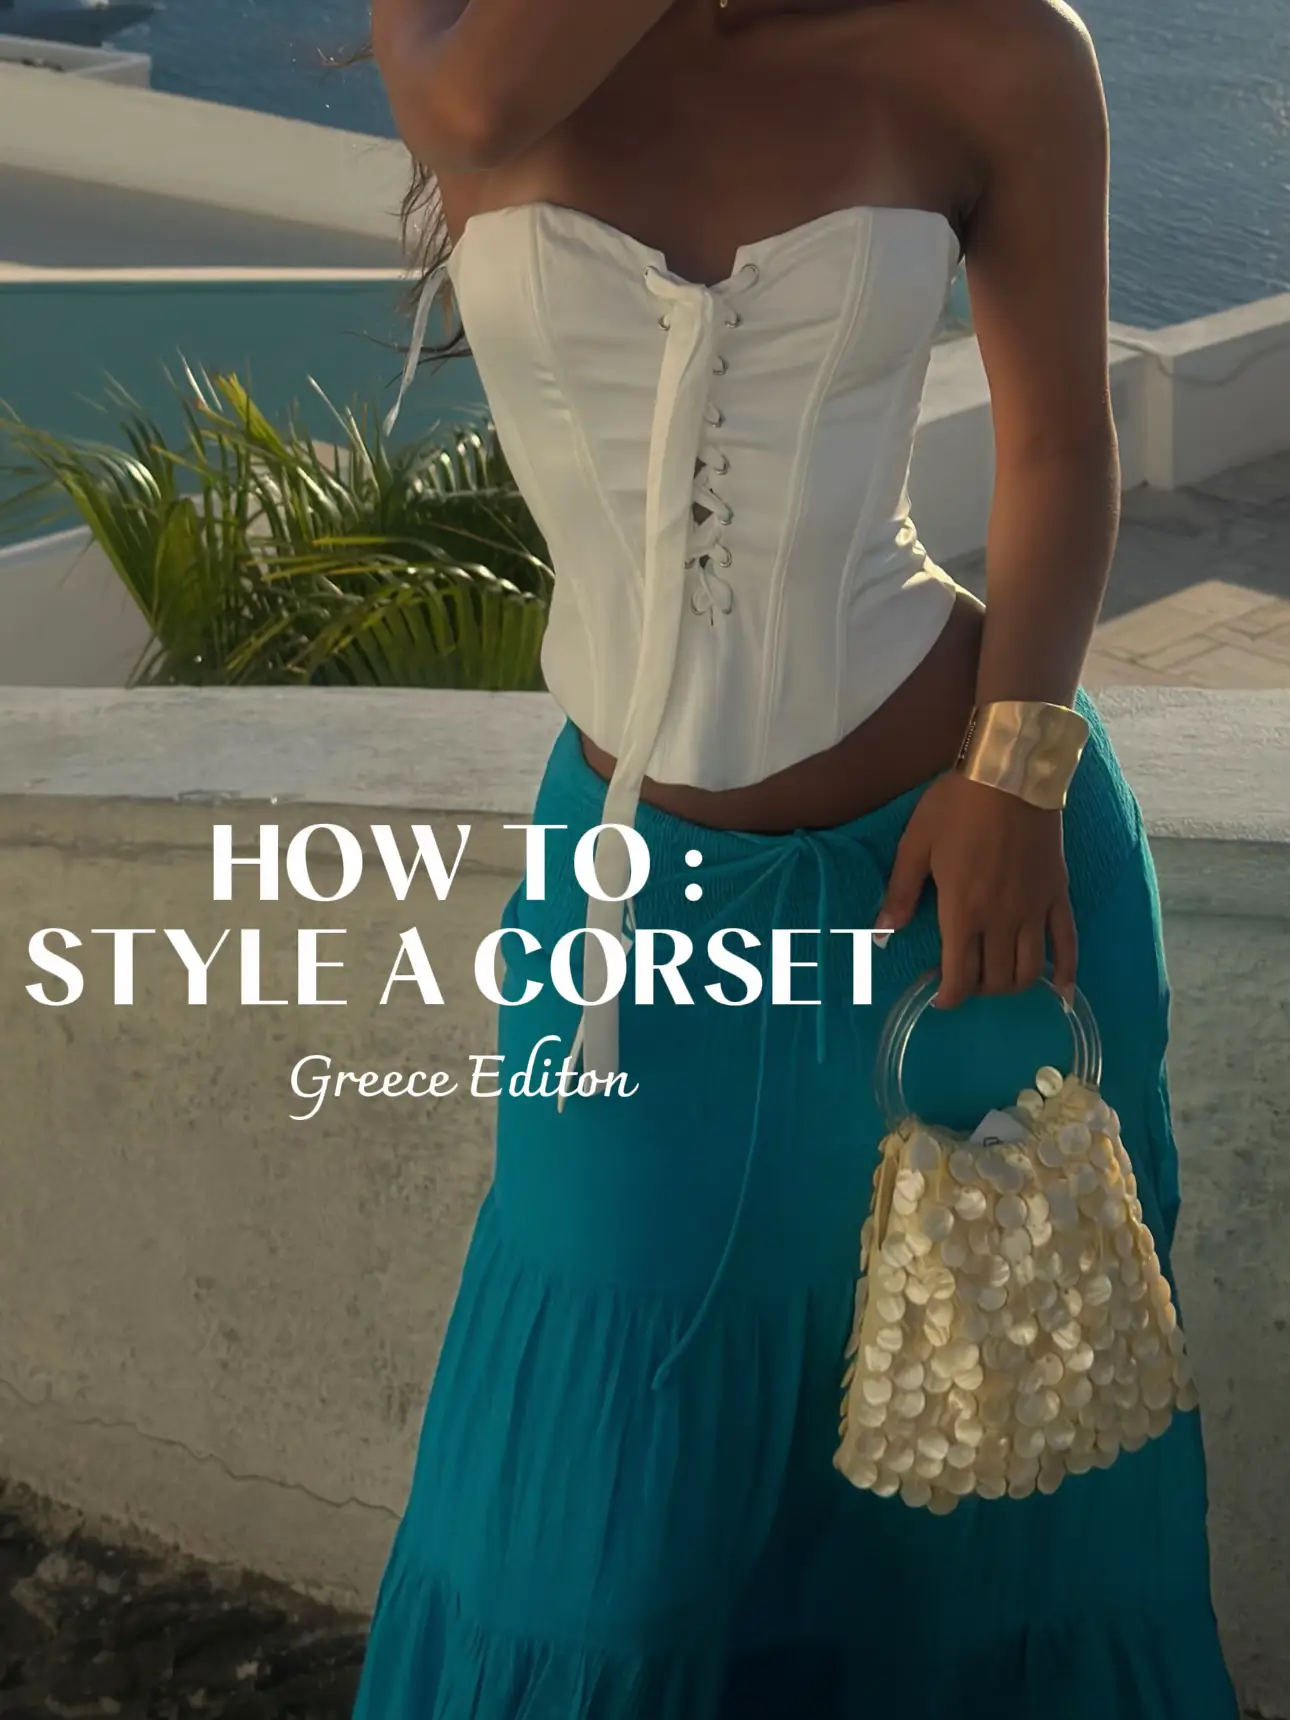 HOW TO STYLE A CORSET, Gallery posted by Grace LaVecchia